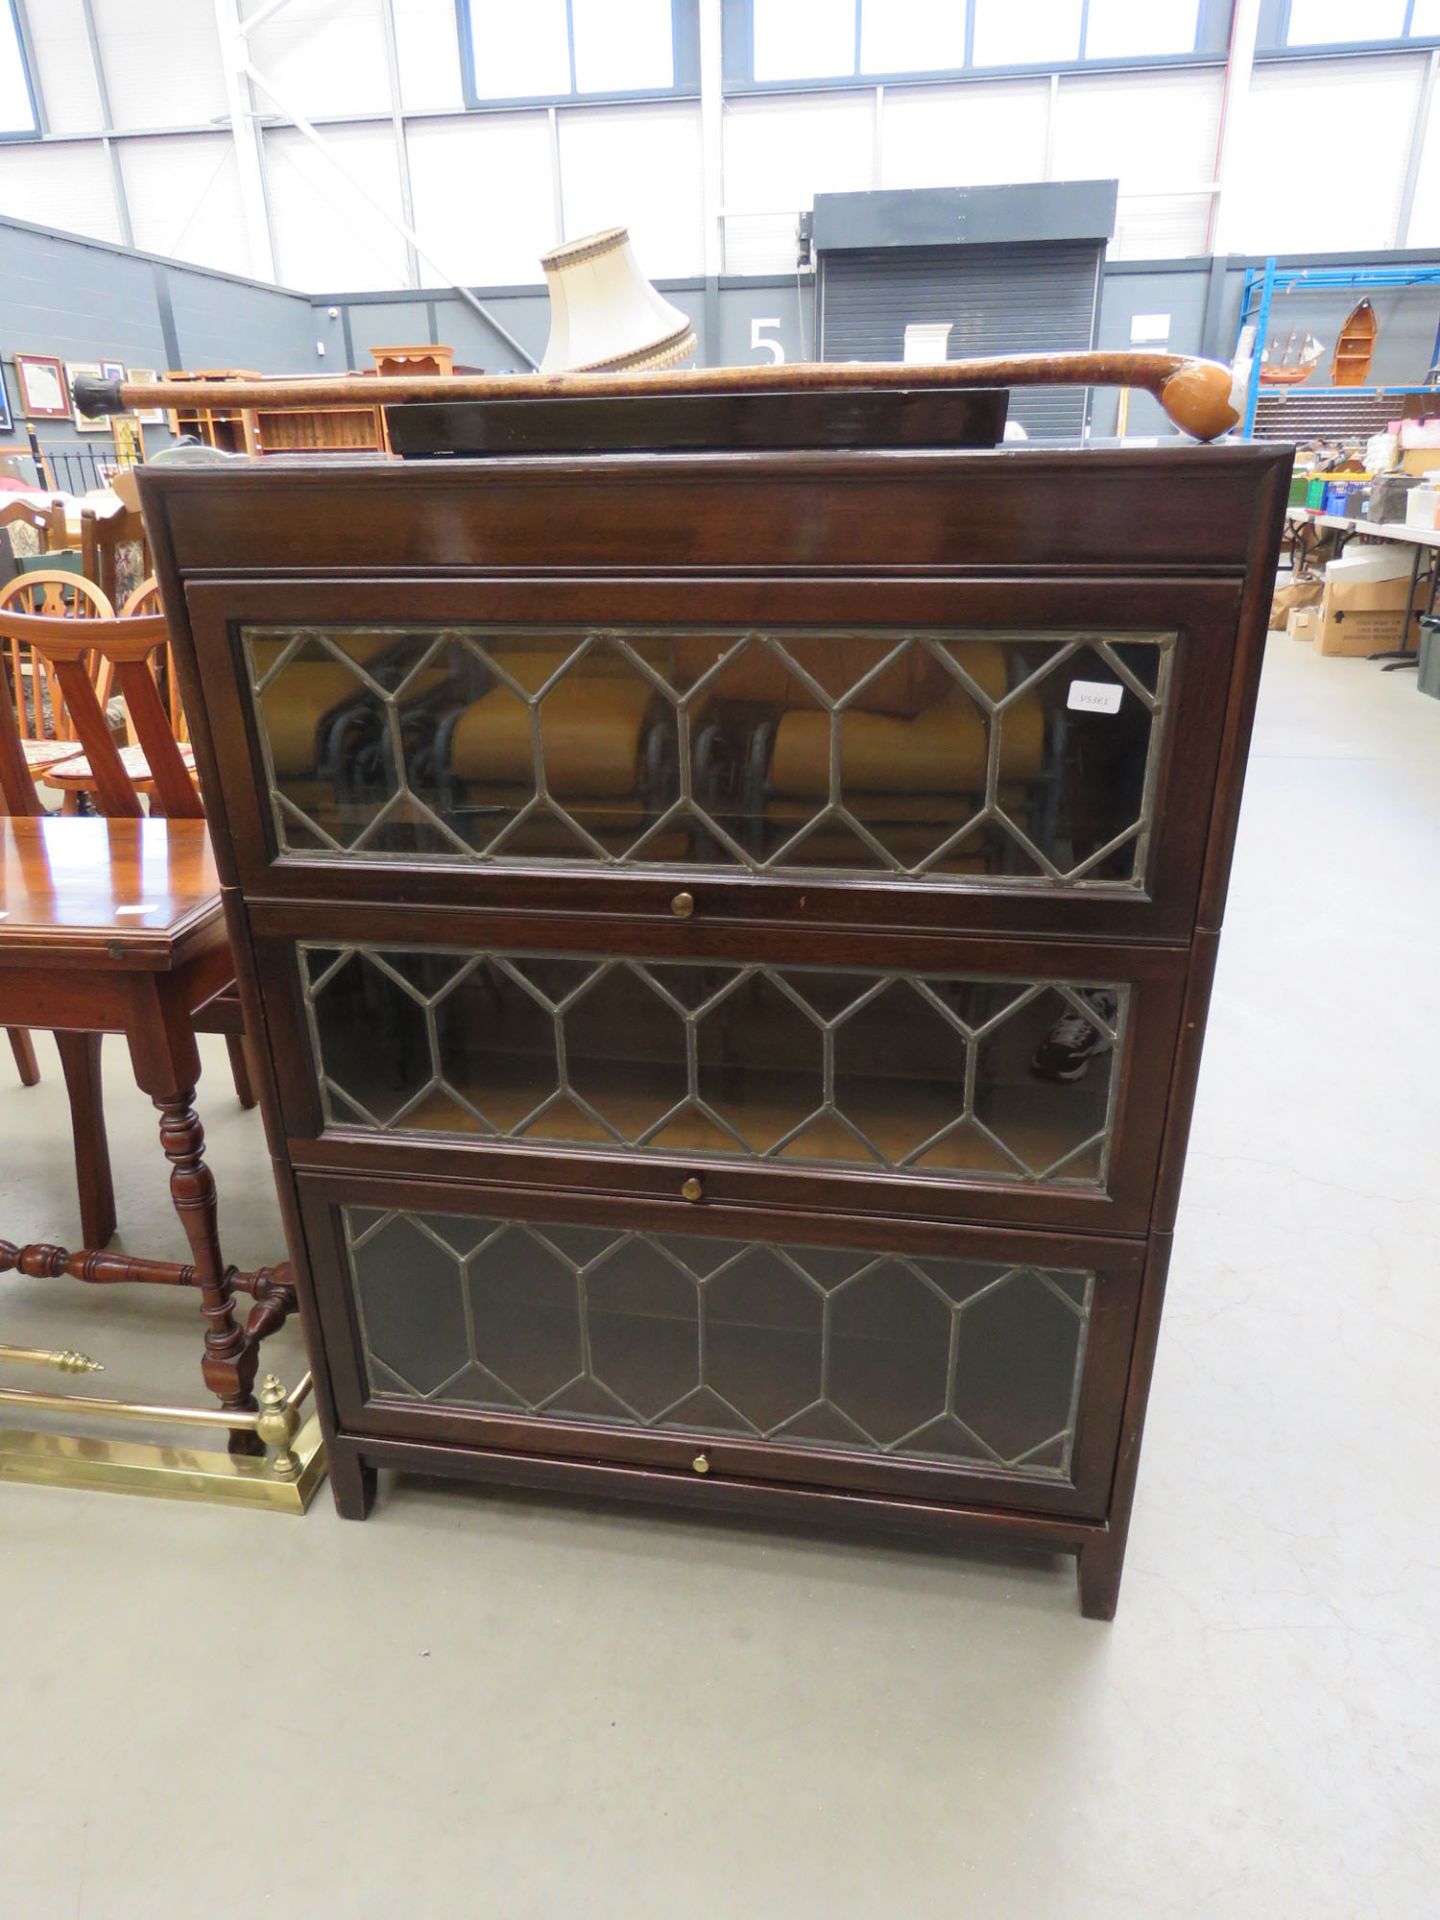 Globe Wernicke style bookcase in 3 sections